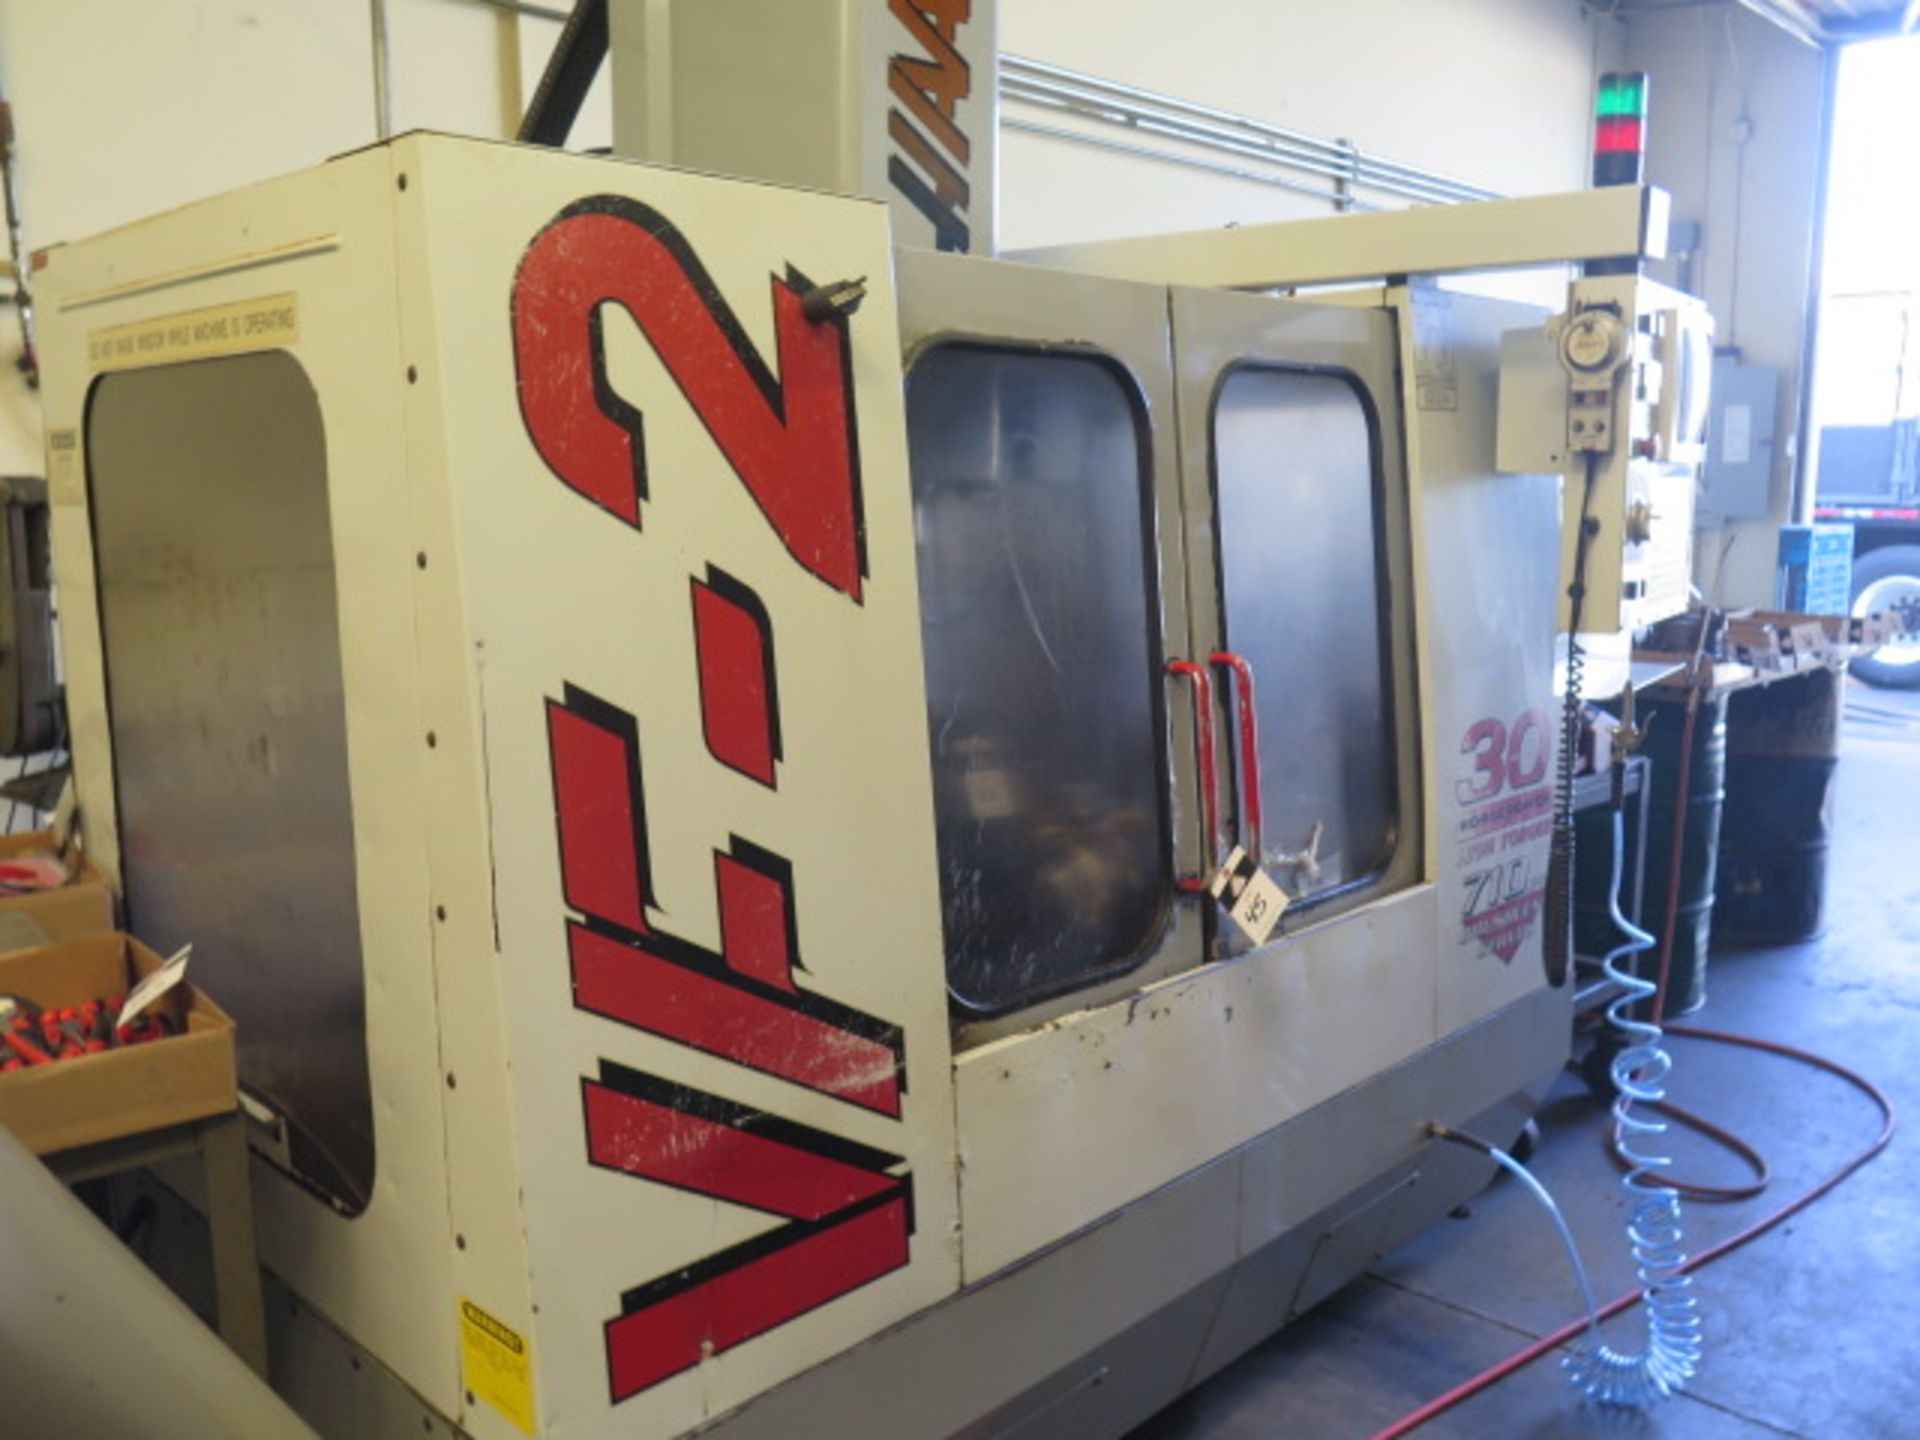 1998 VF-2 4-Axis CNC Vertical Machining Center s/n 15521 w/ Haas Controls, Hand Wheel, (SOLD AS IS) - Image 2 of 20